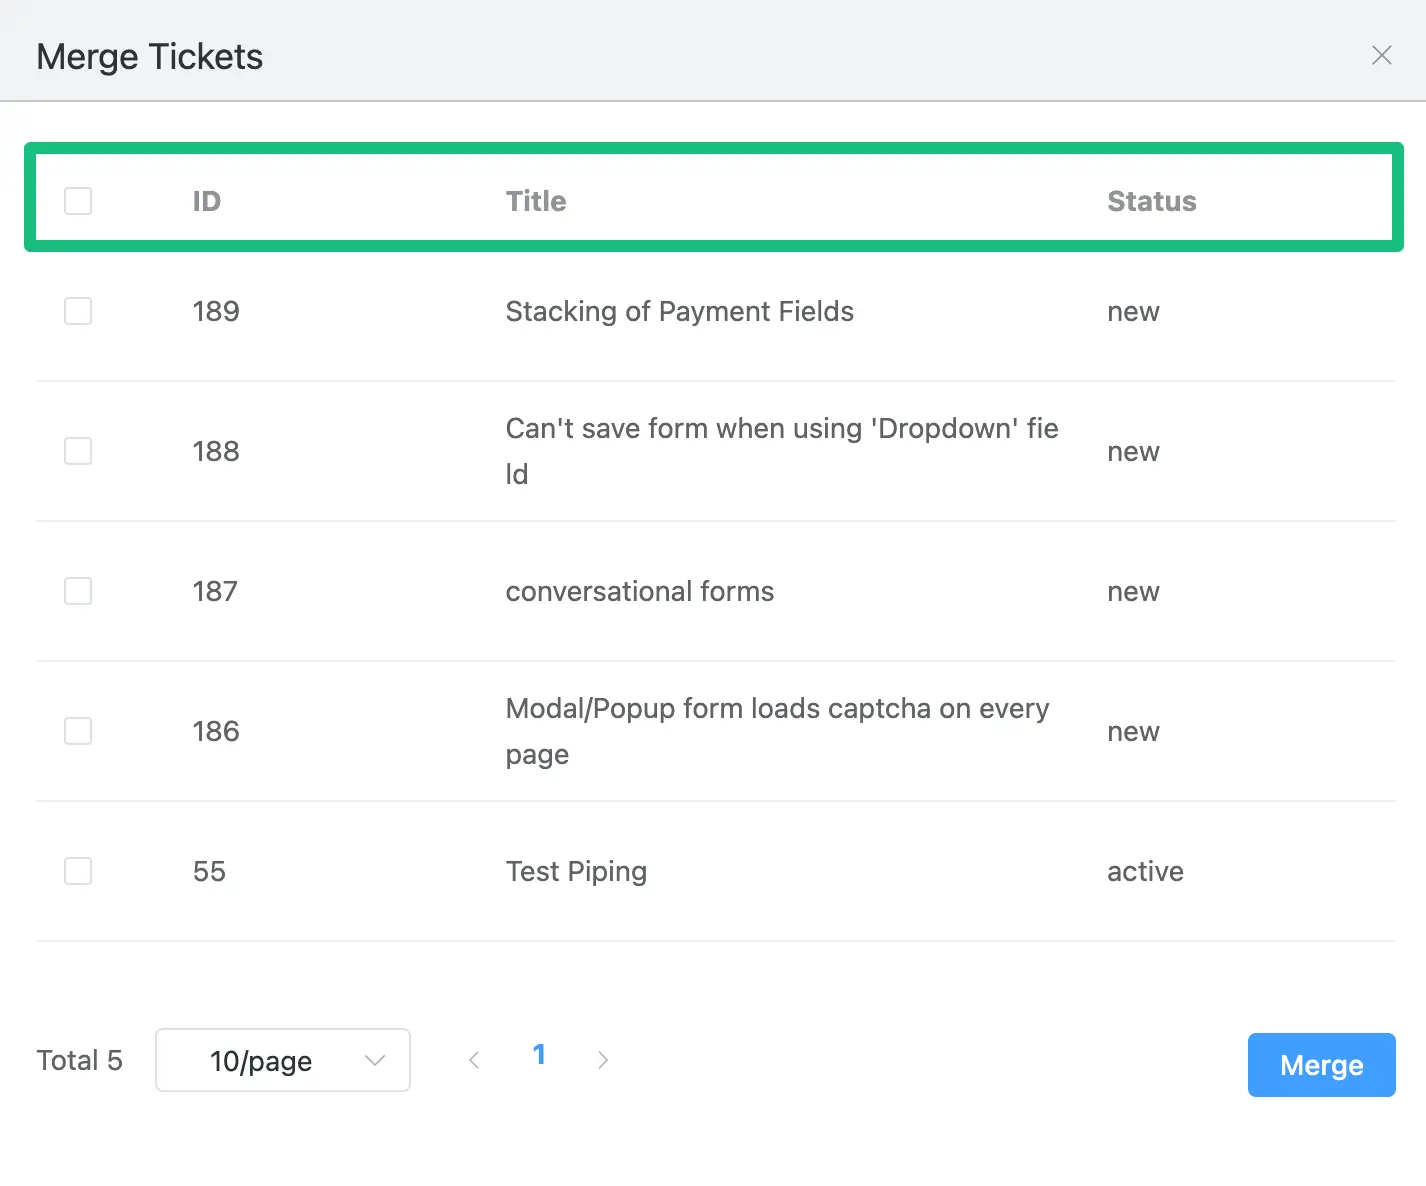 Display of all merged tickets